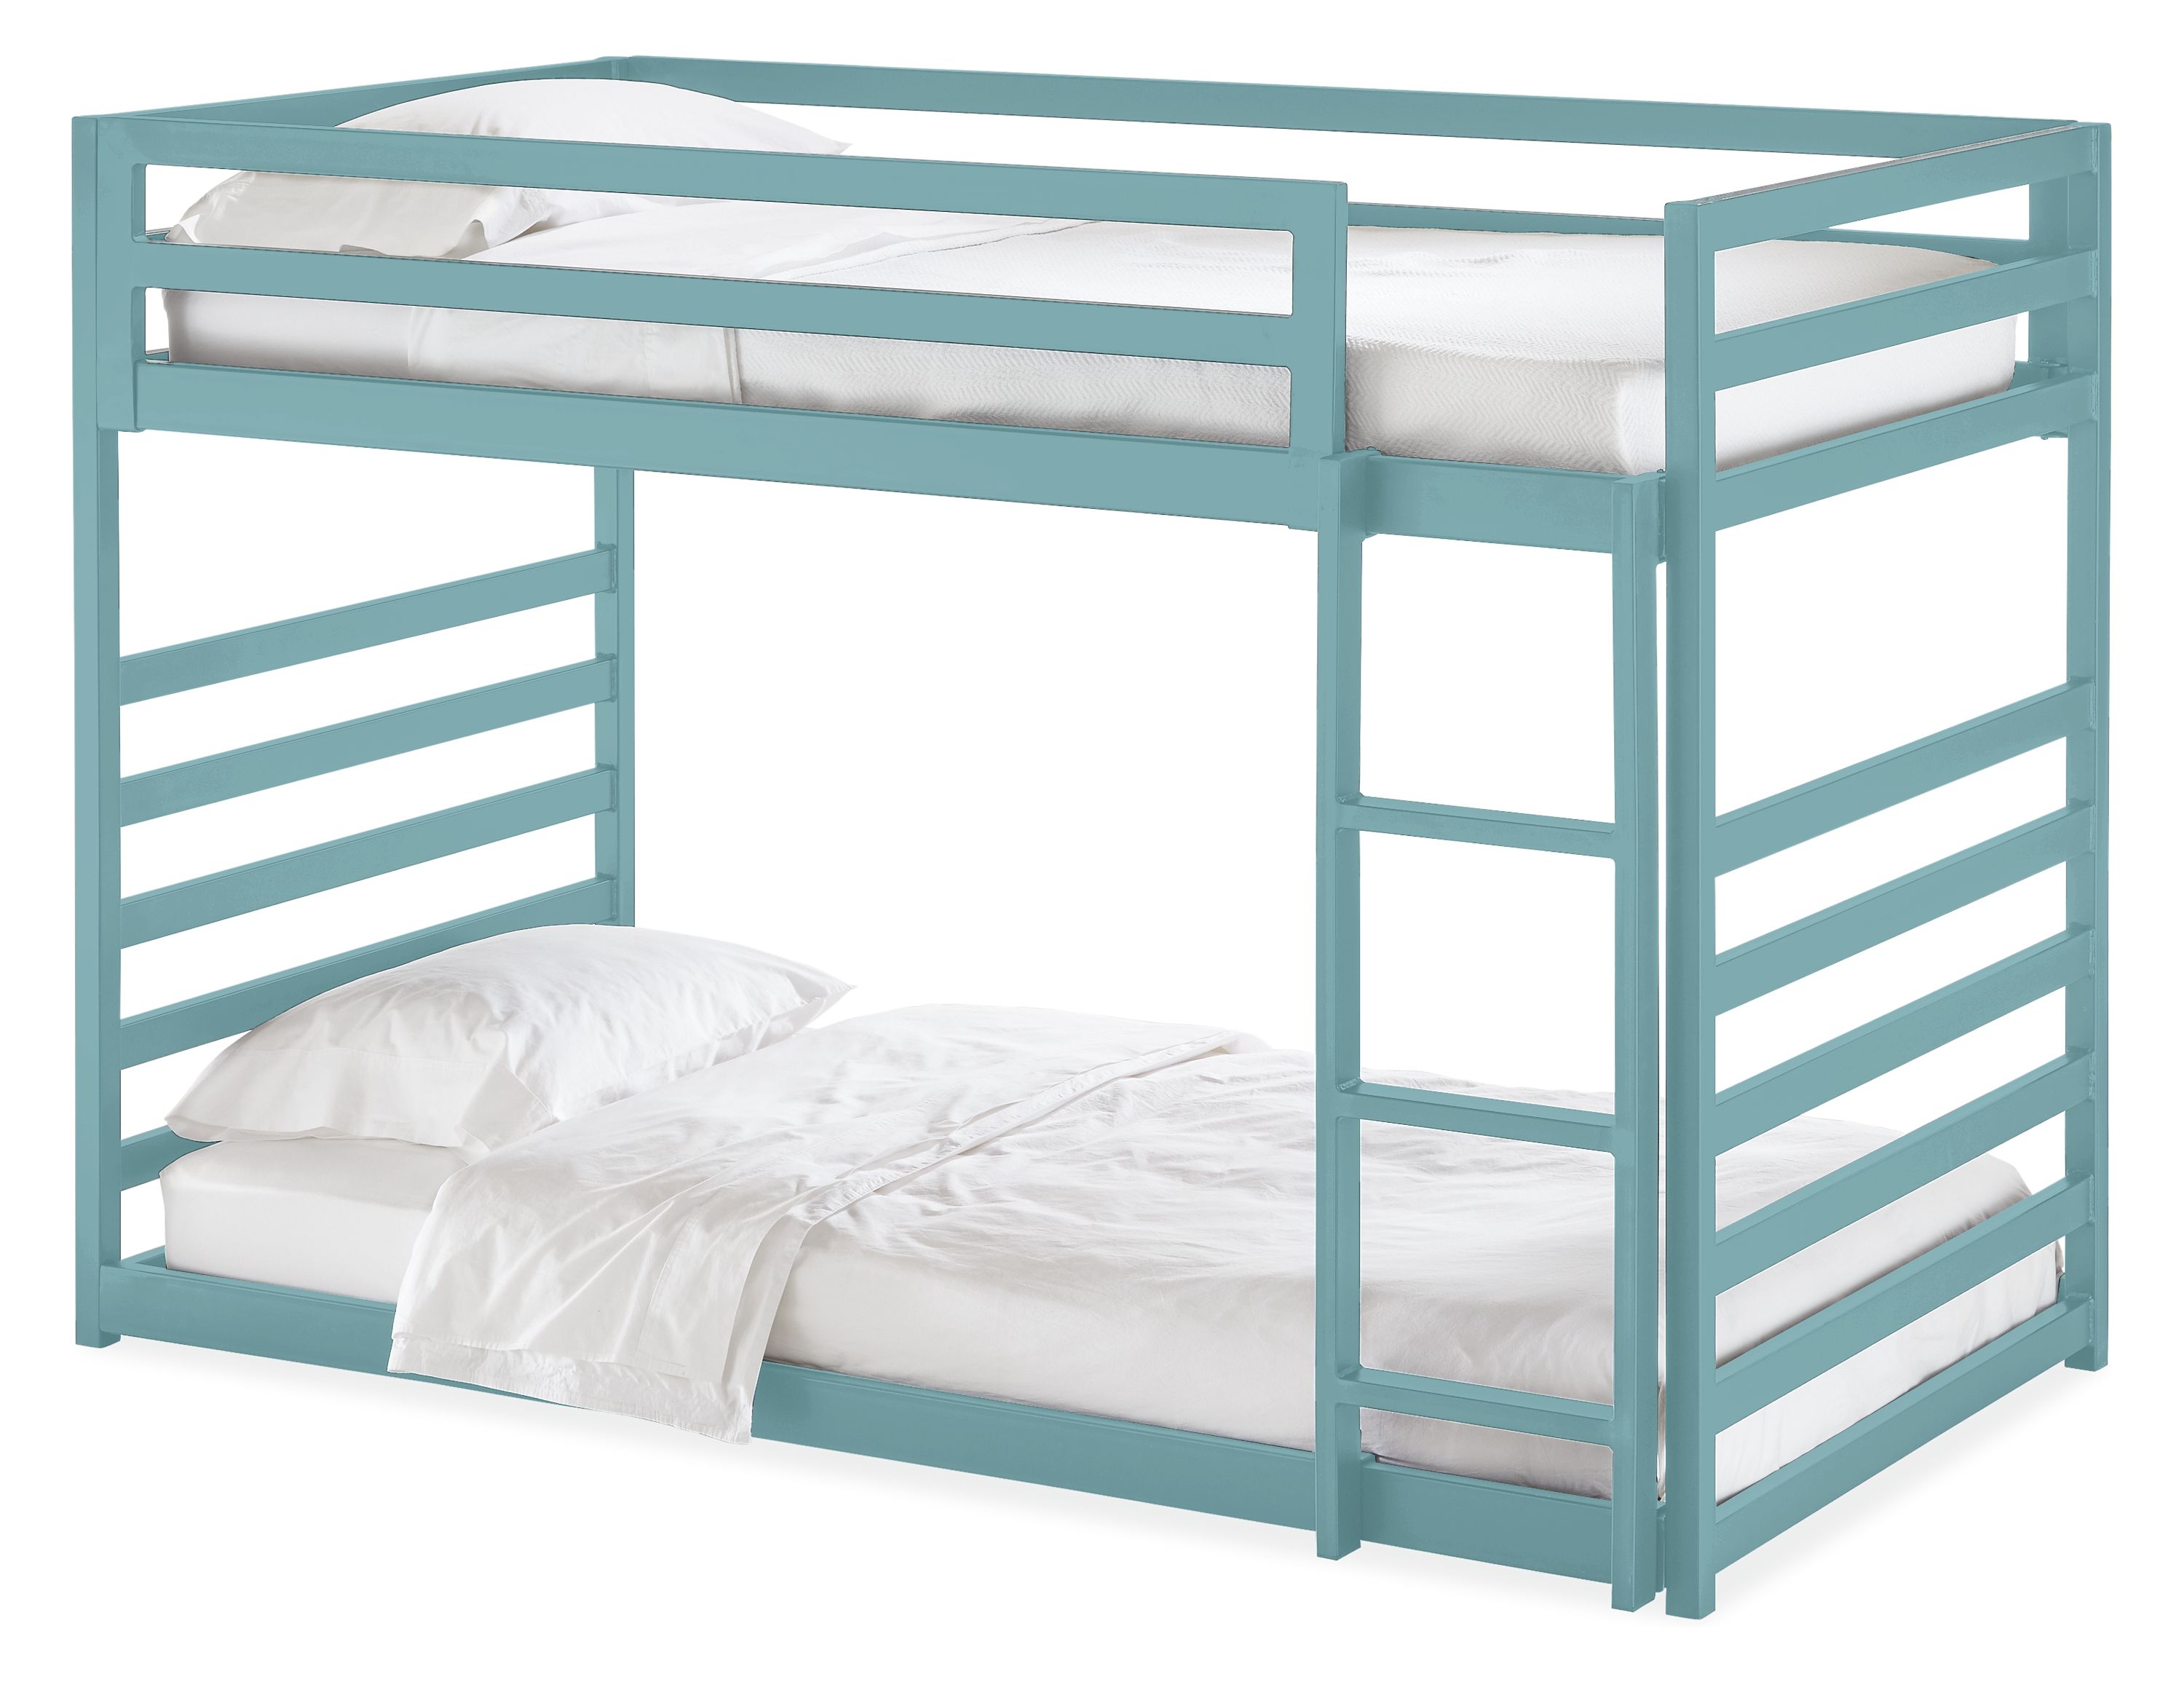 Fort Bunk Beds In Colors Twin Over, Bunk Bed Fort